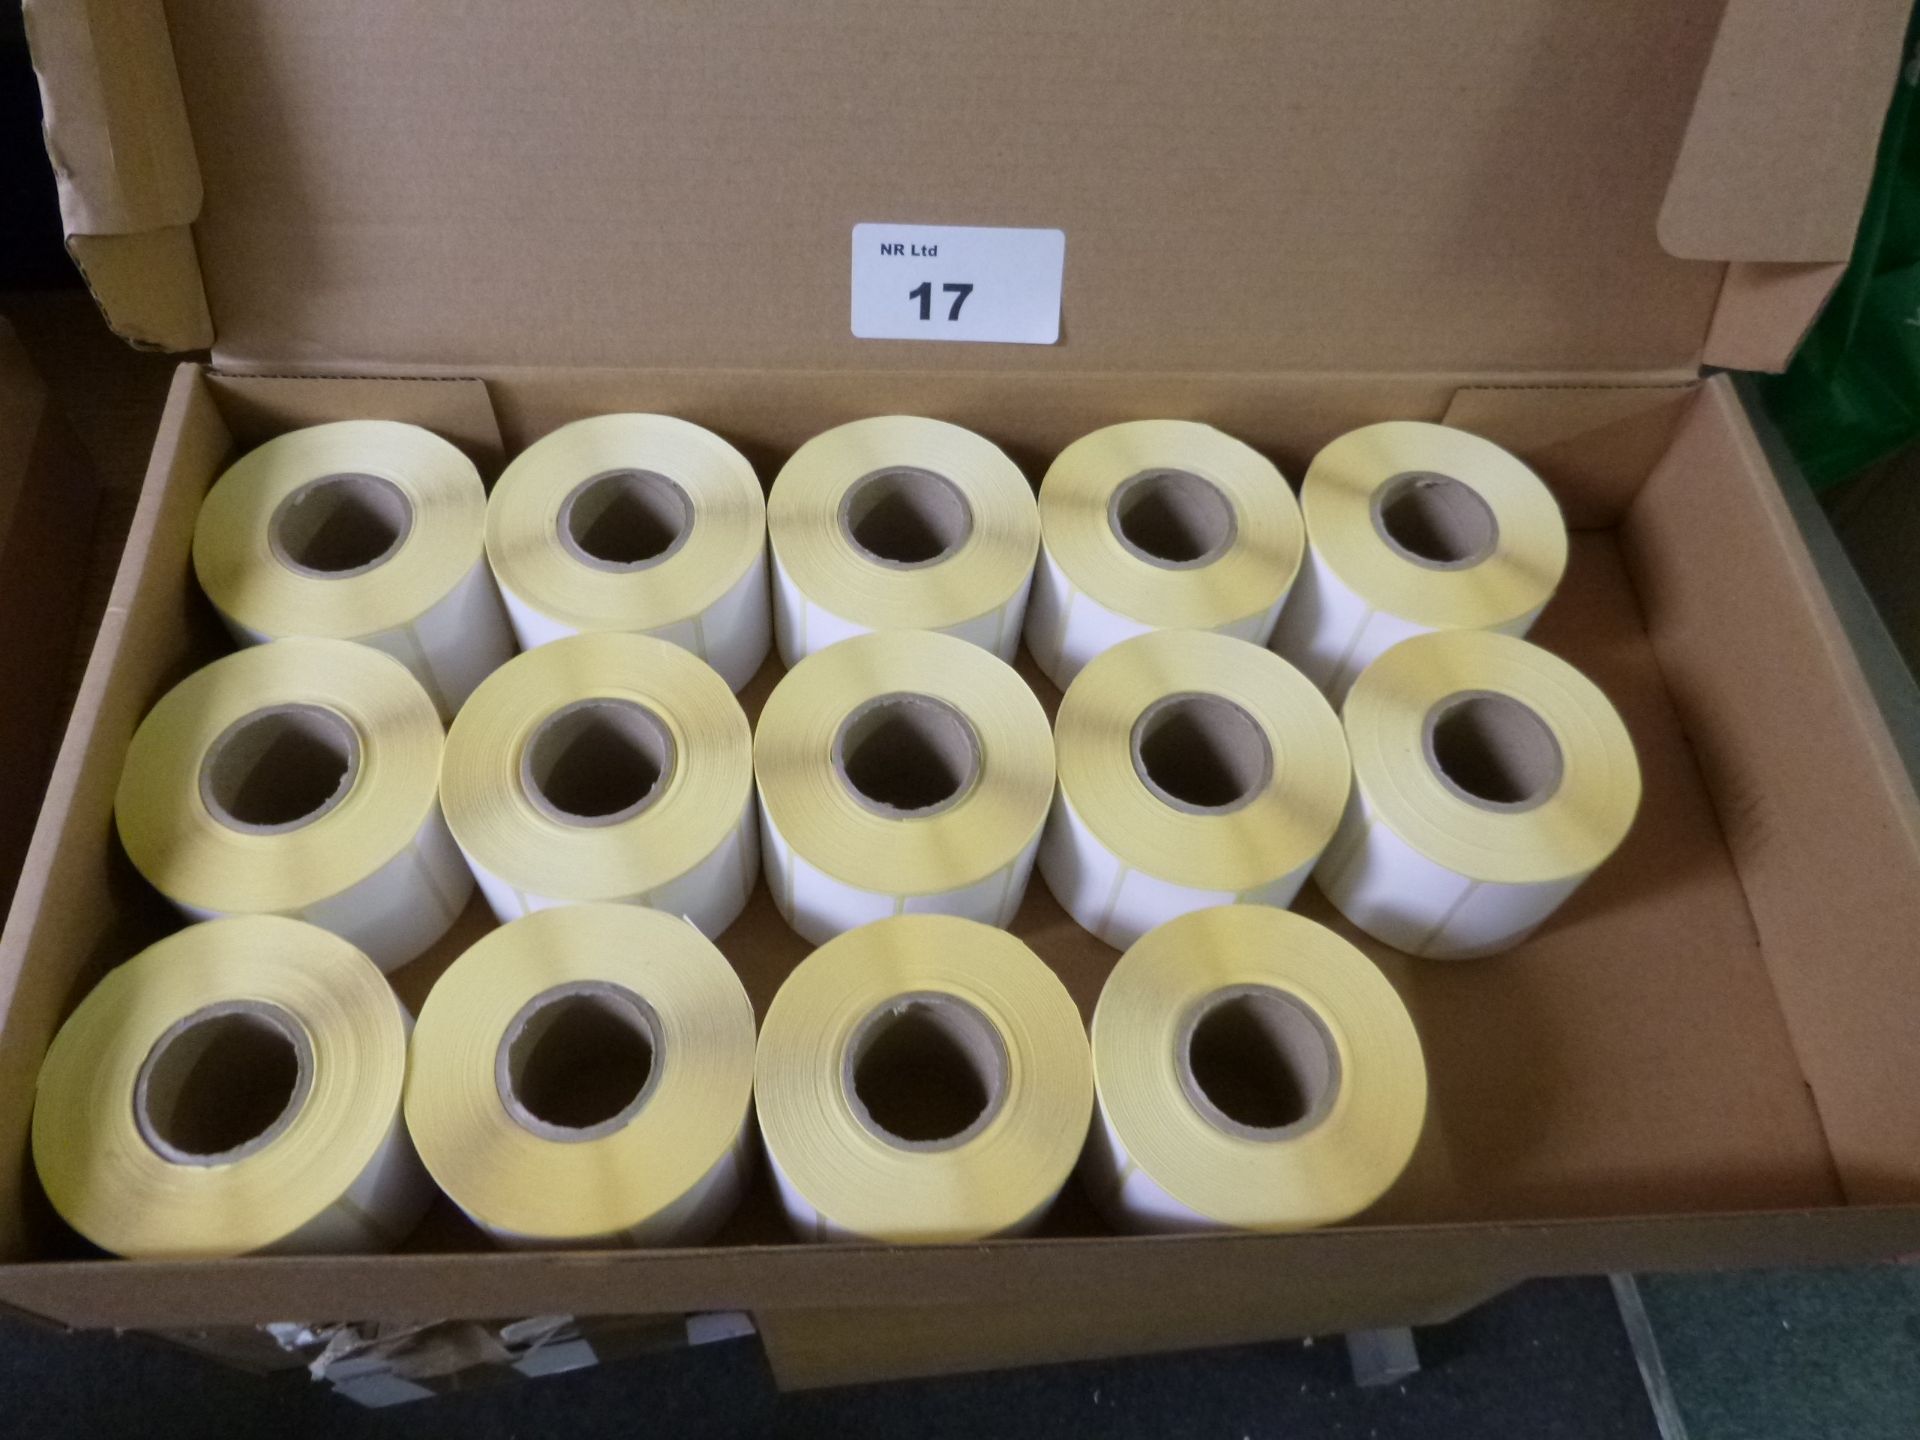 14 X ROLLS OF ZEBRA DIRECT THERMAL LABELS TYPE A. EACH ROLL CONTAINS 1000 LABELS 55MM X 17MM